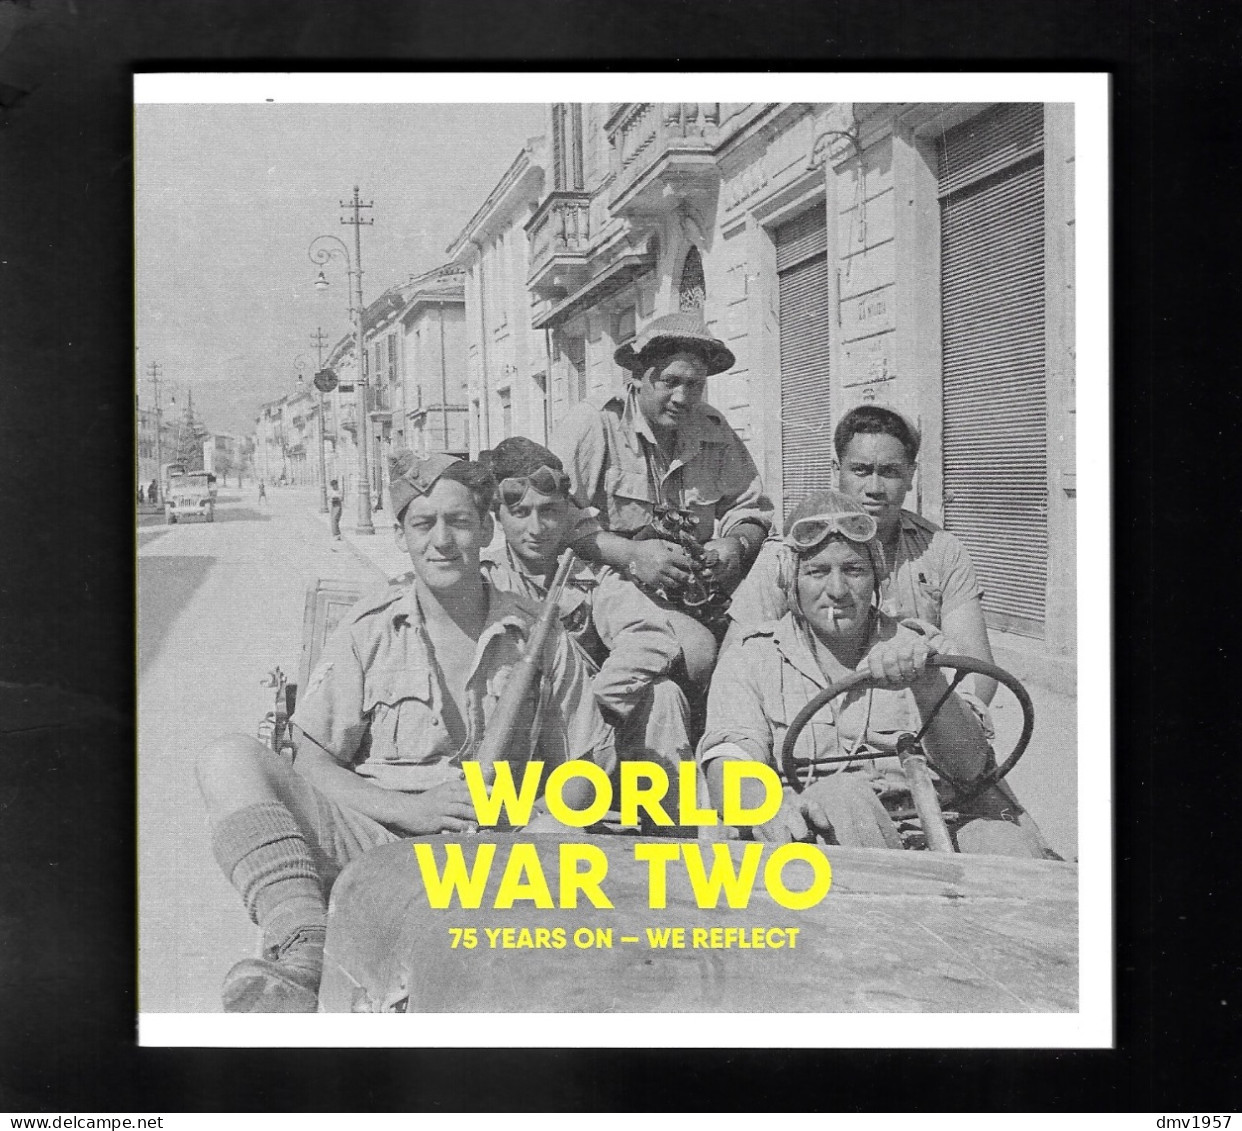 New Zealand 2001 World War Two - 75 Years On Booklet (28 X $1.30 Stamps) - Carnets